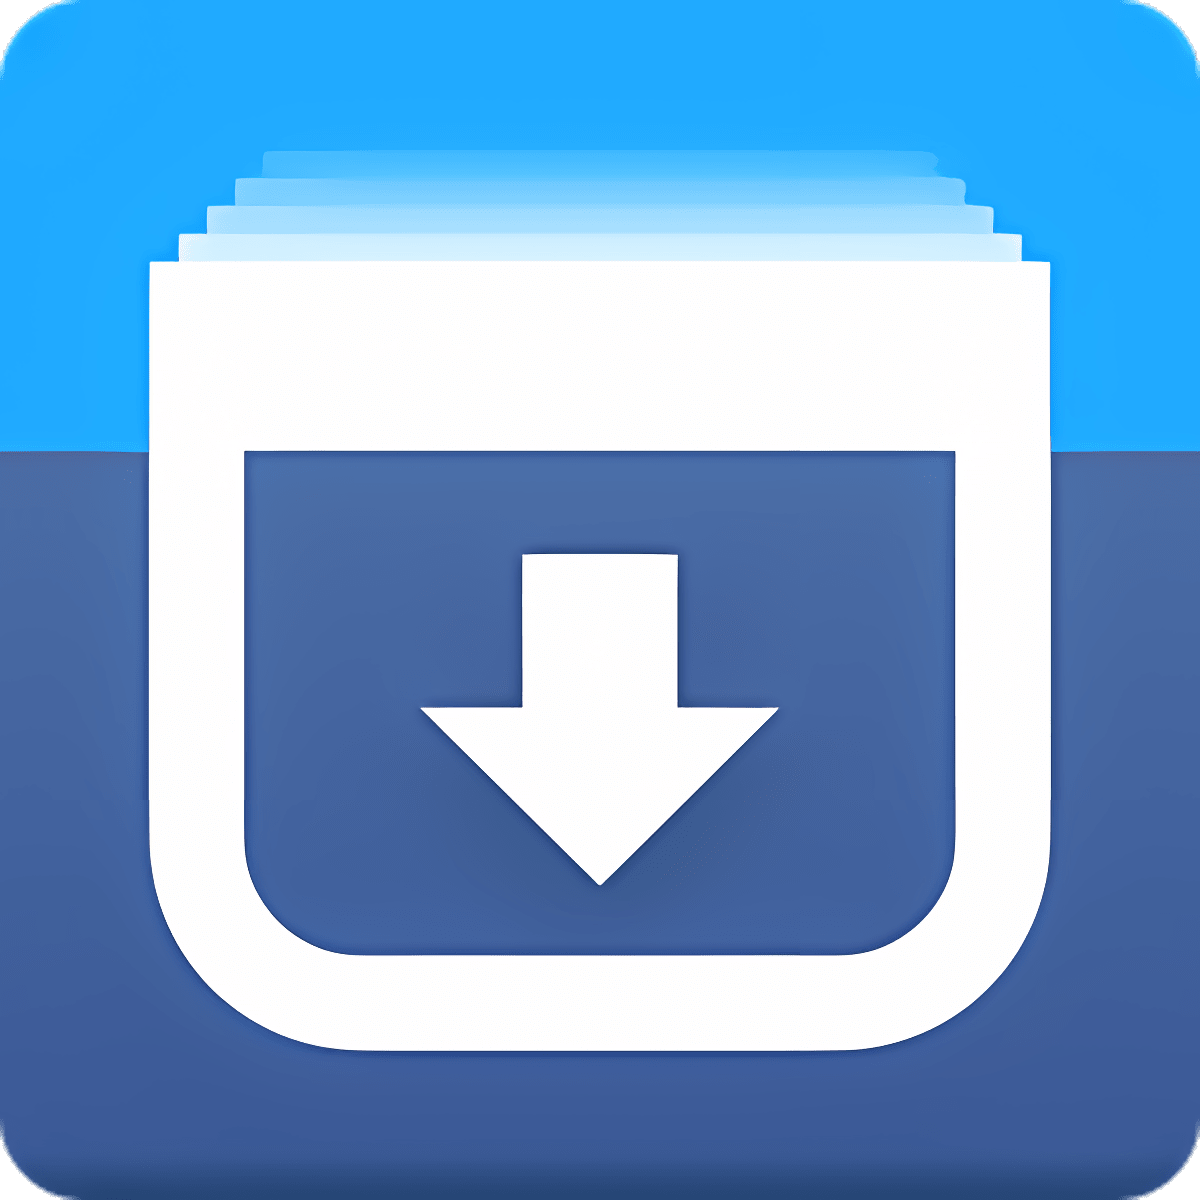 Facebook Video Downloader 6.17.6 instal the new version for android